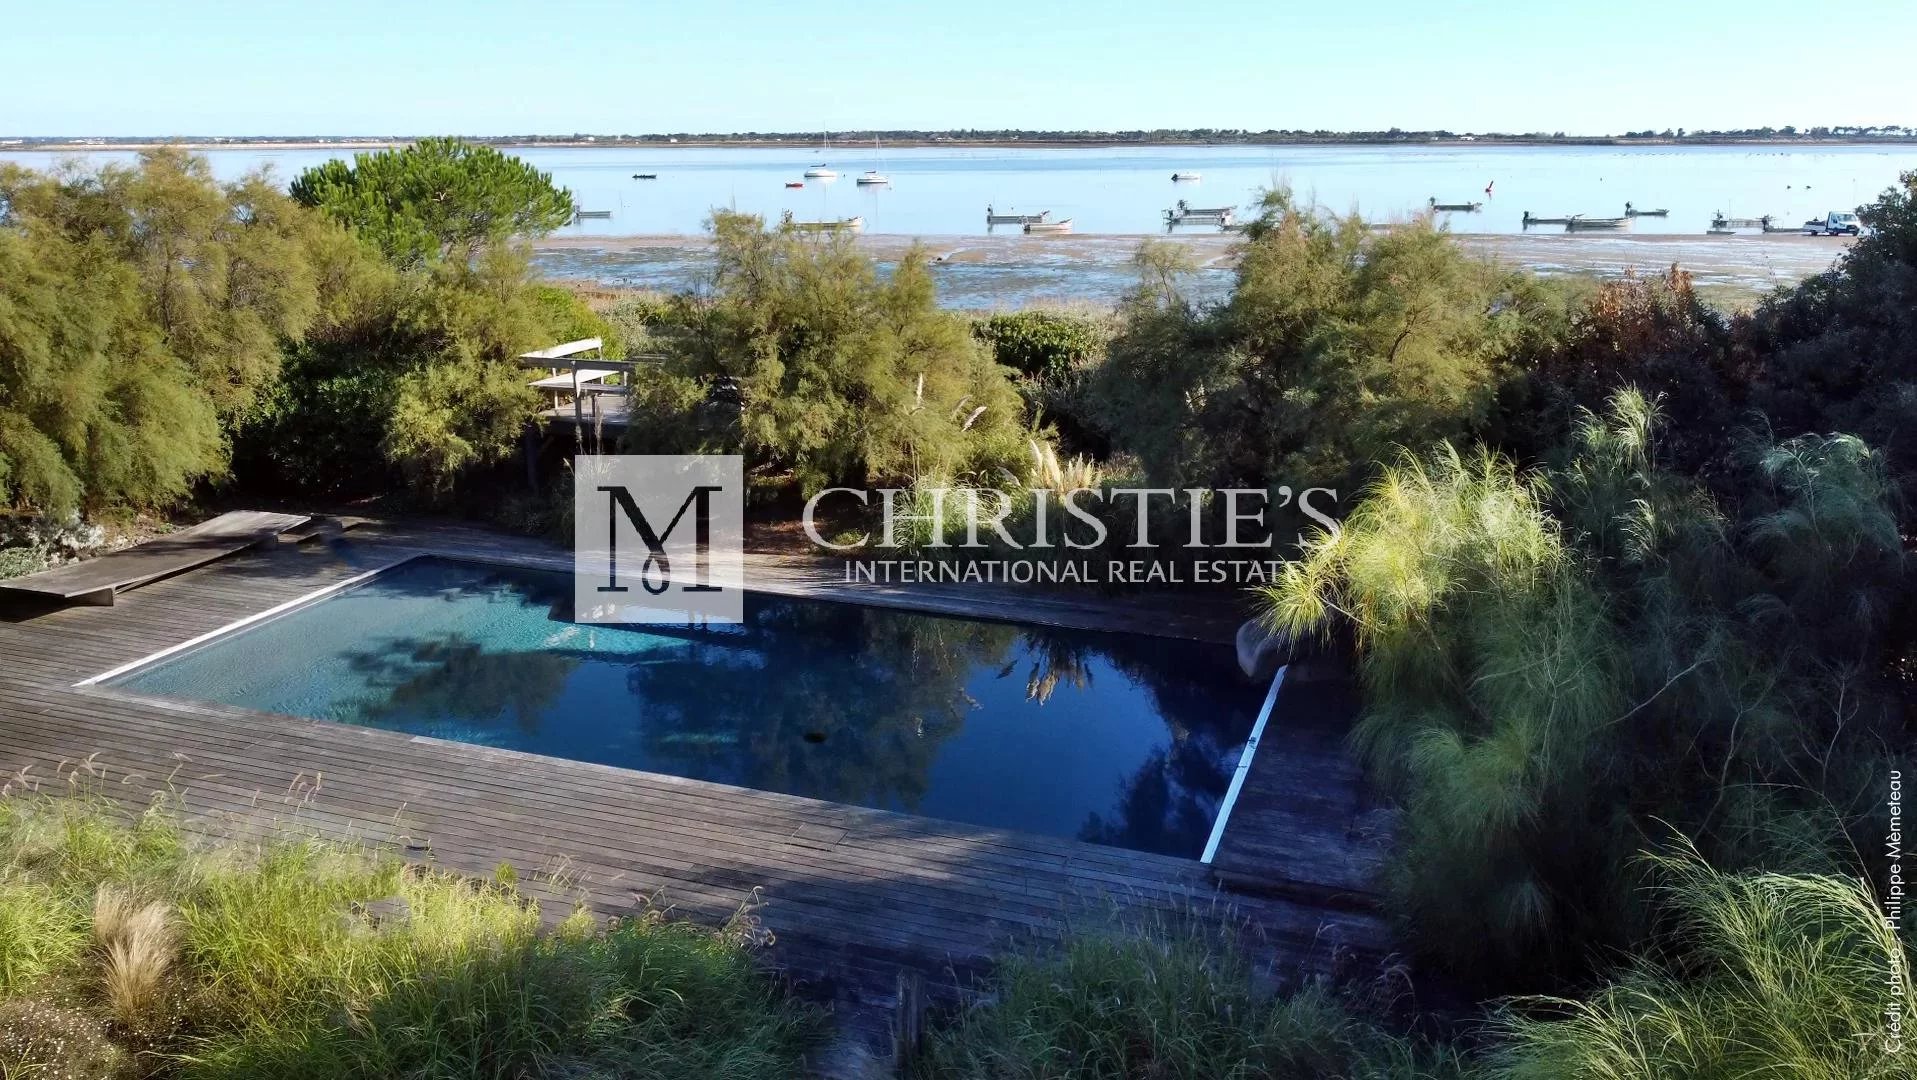 For sale outstanding property overlooking the Bay of Les Portes en Ré